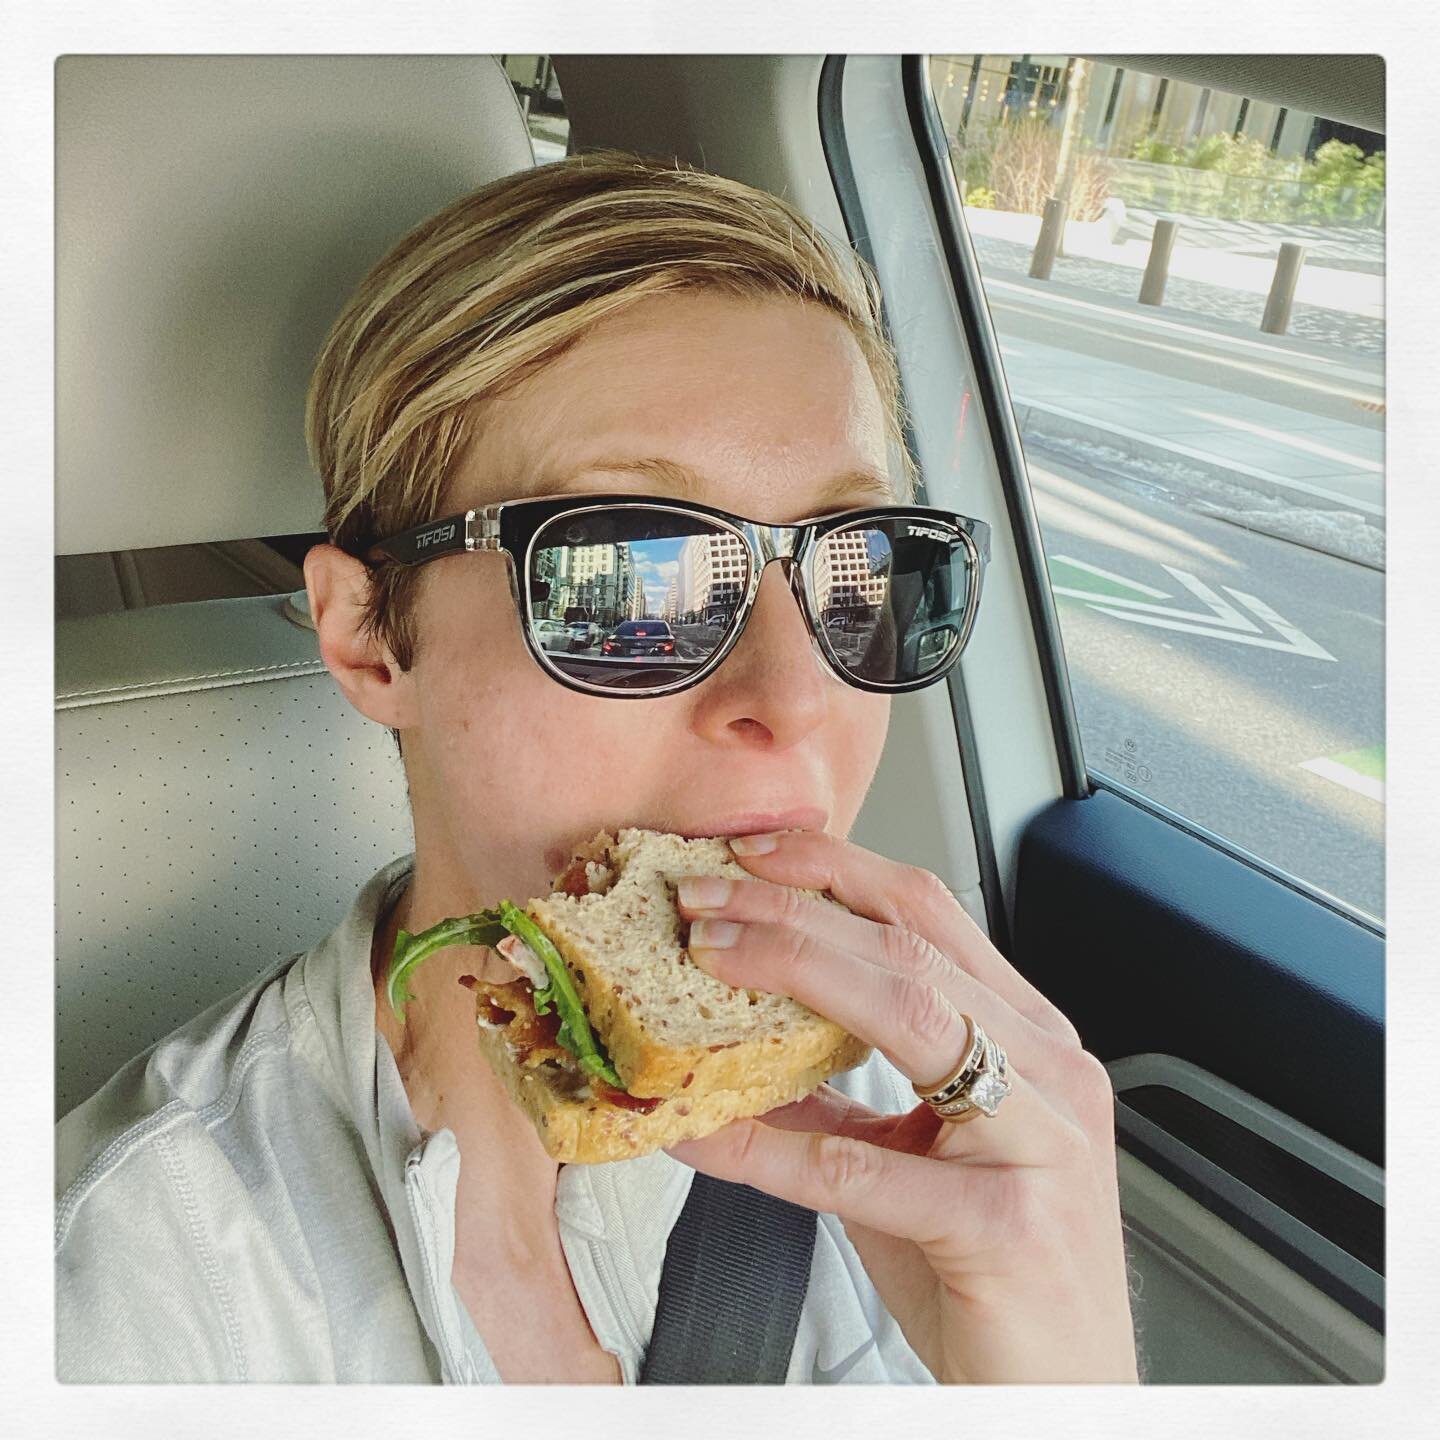 A picture speaks a 1000 words 📸 
A mom. Post run. Starving and Eating lunch at stop lights so she can get to carpool on time. I&rsquo;m re-exhausted thinking about it 😳

Oh and yes. That is a GF BLT the size of my face.

#mommingainteasy #momsdoita